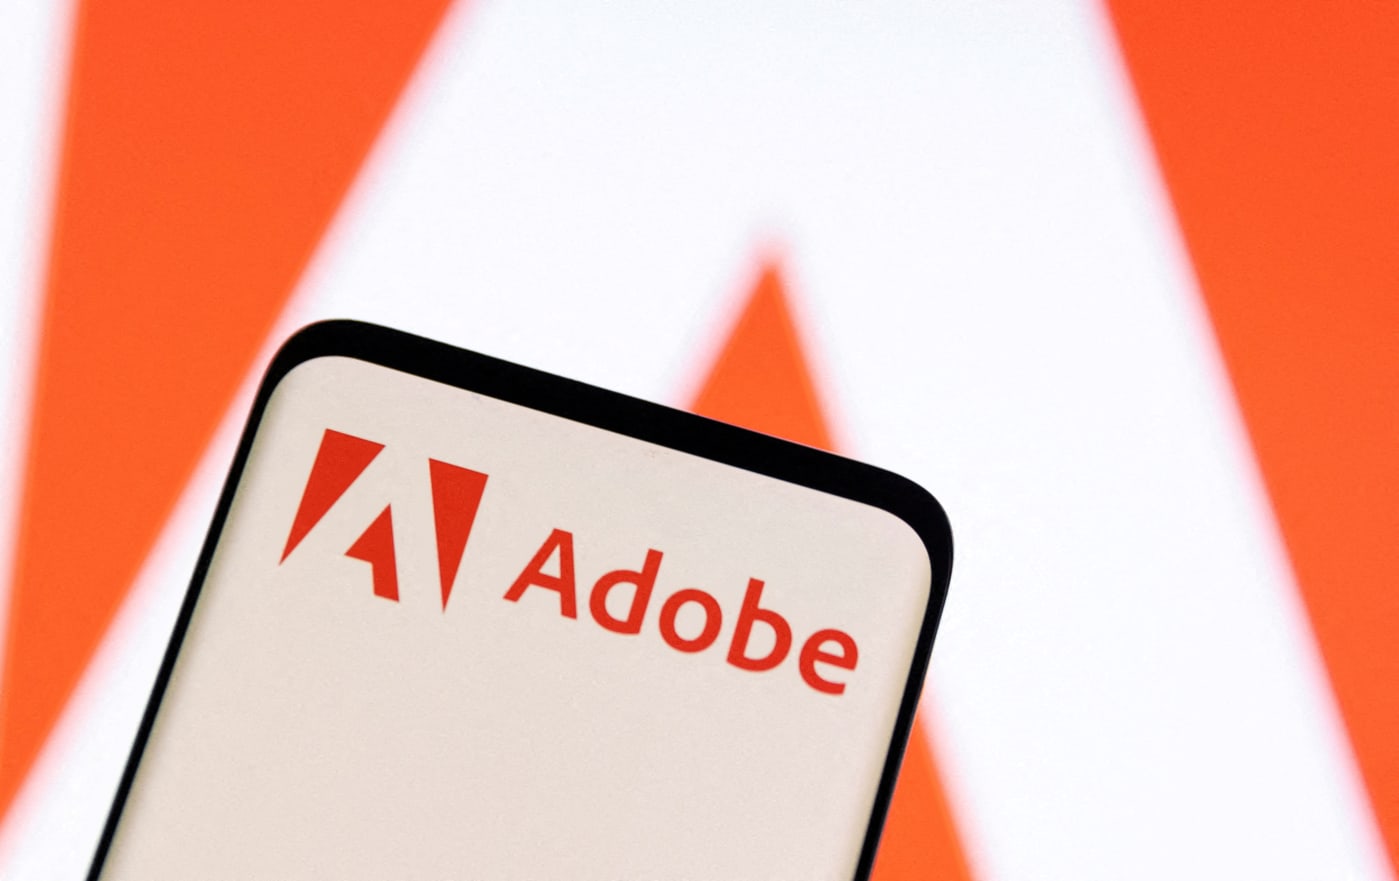 The US has sued Adobe over early termination fees and making subscriptions hard to cancel